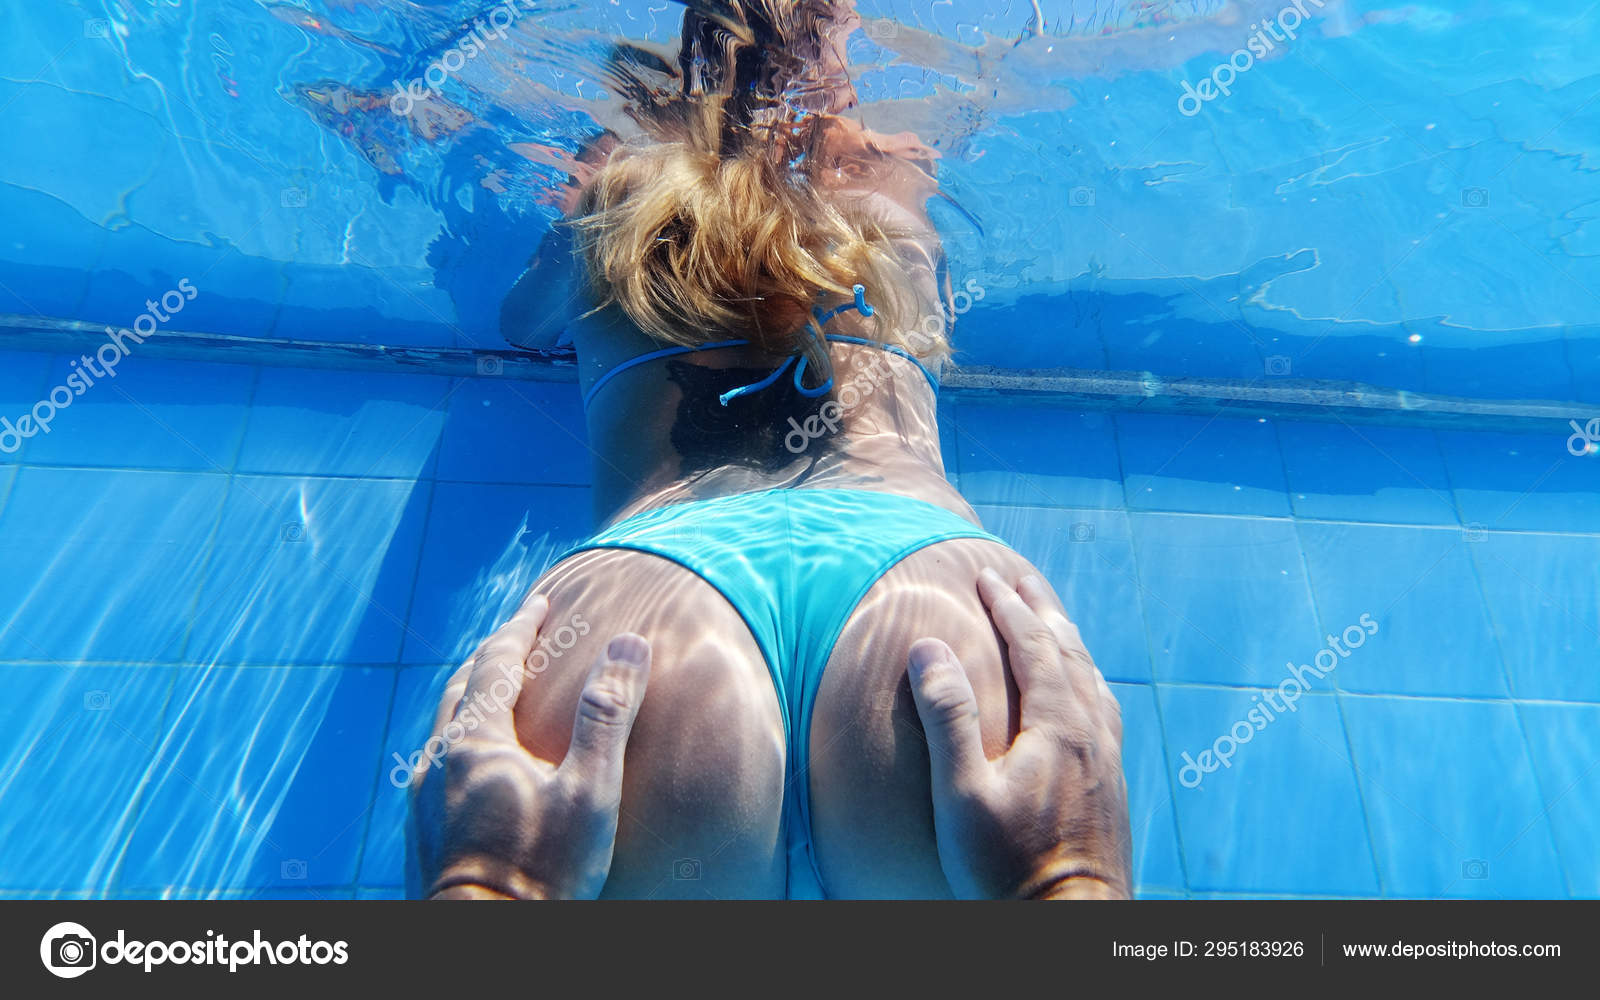 Girl ass floating in pool big ass Man Hands Touching Butt Girl Underwater Holiday Vacation Summer Concept Stock Photo By C Nelka7812 295183926